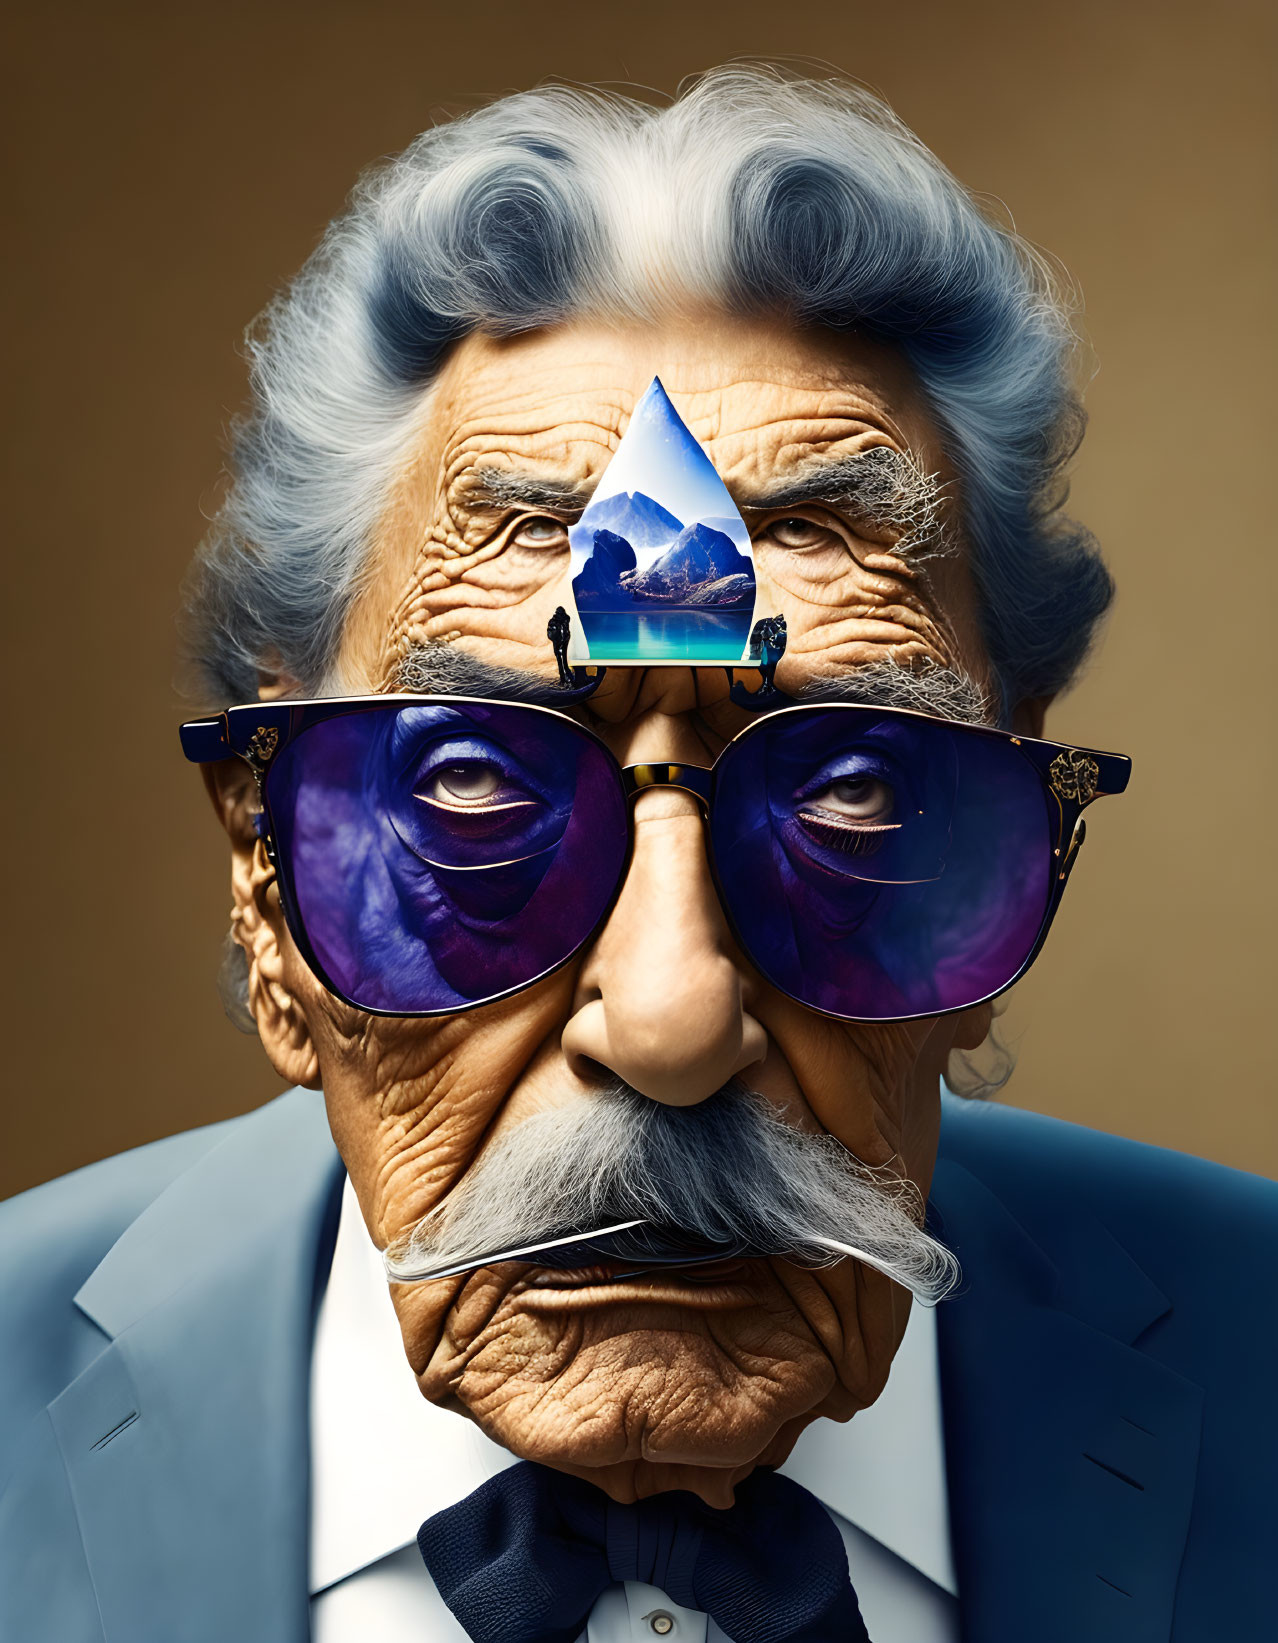 Elderly gentleman with mustache and gray hair in blue-tinted sunglasses